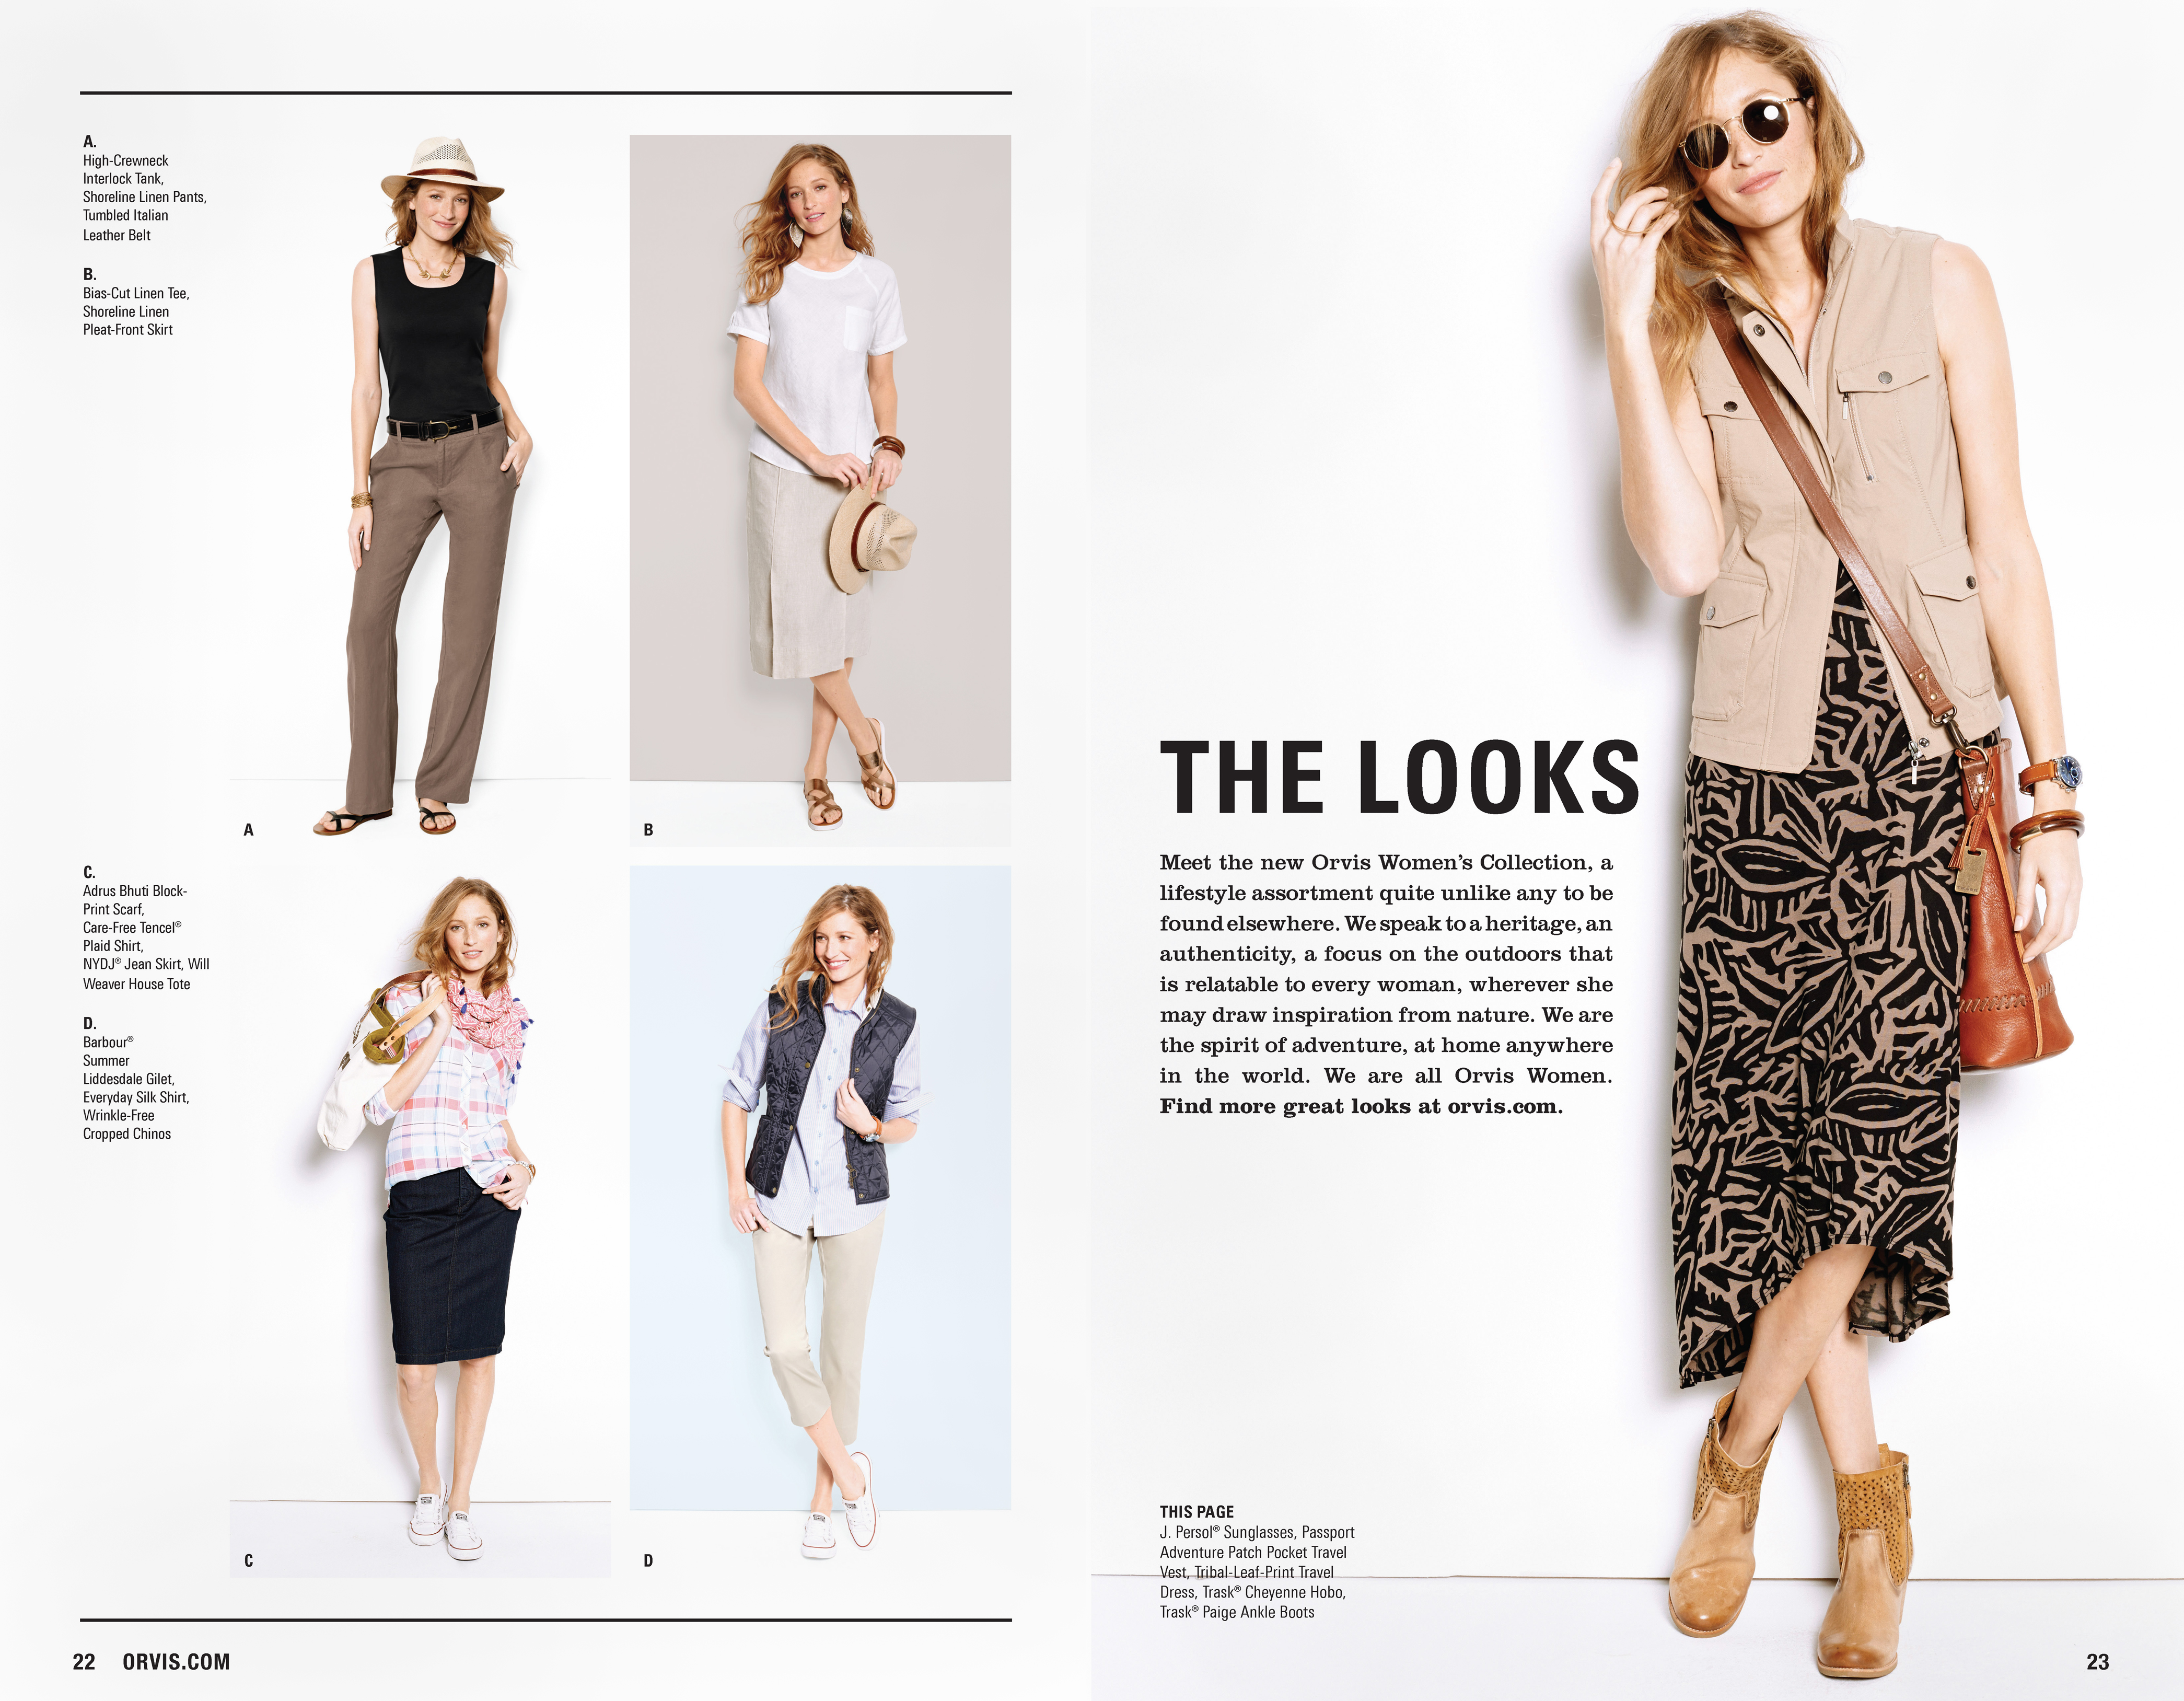 22-23_Looks_Page_1